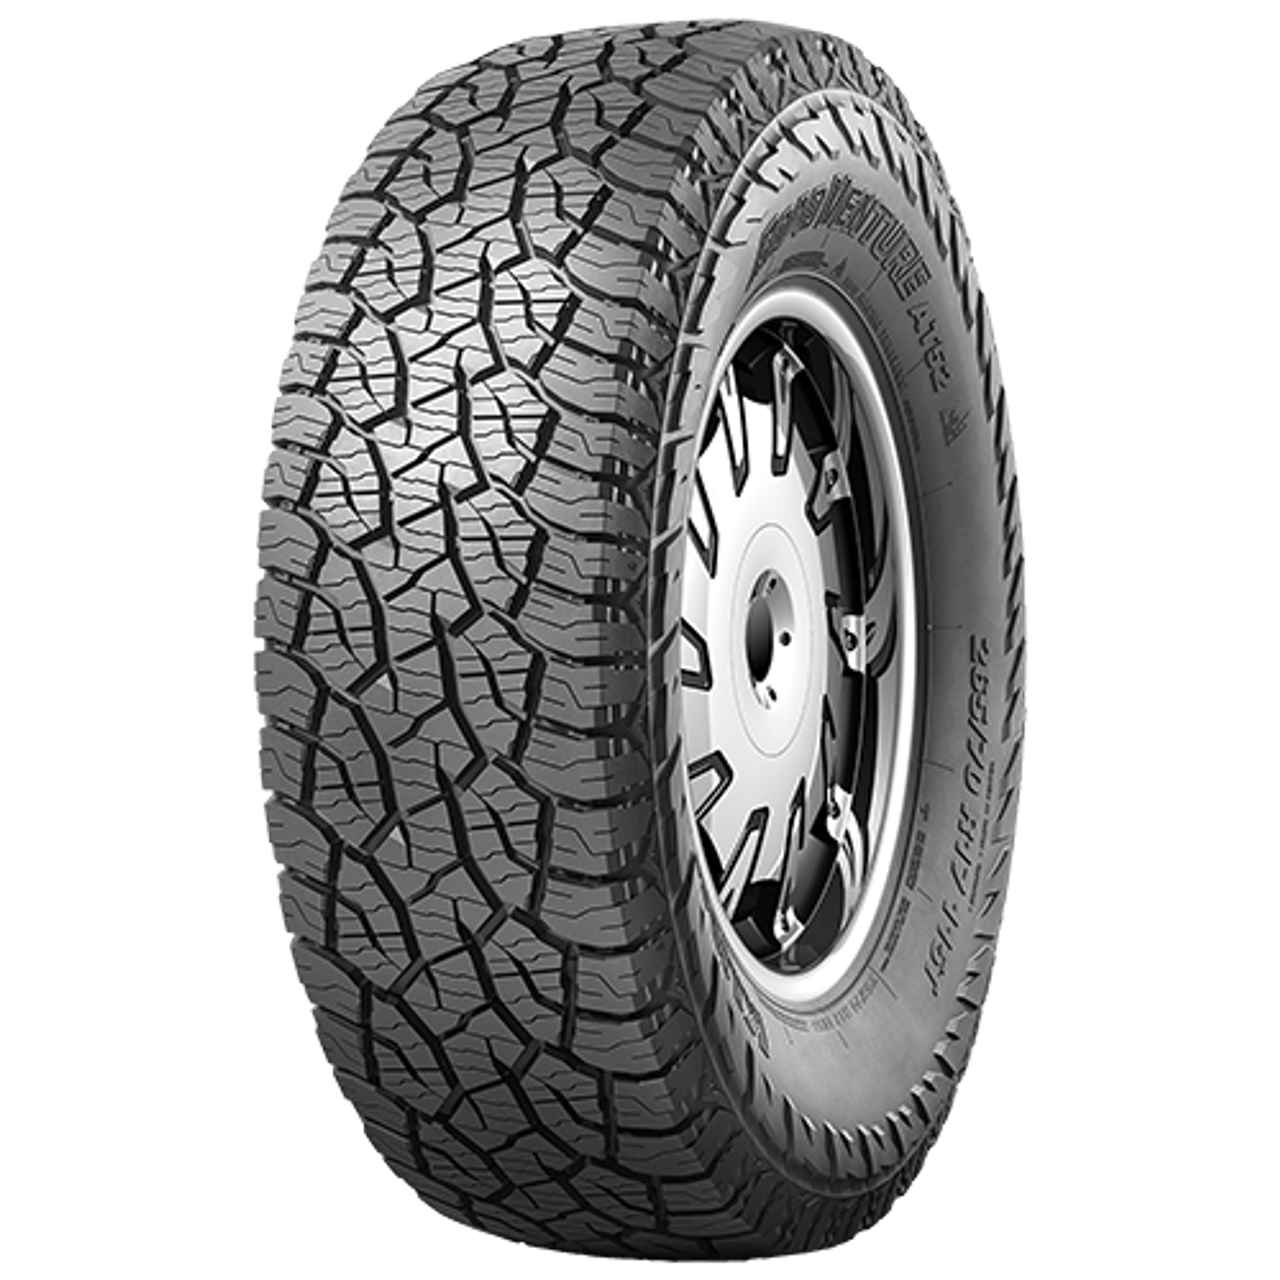 KUMHO ROAD VENTURE AT52 255/60R18 112T BSW